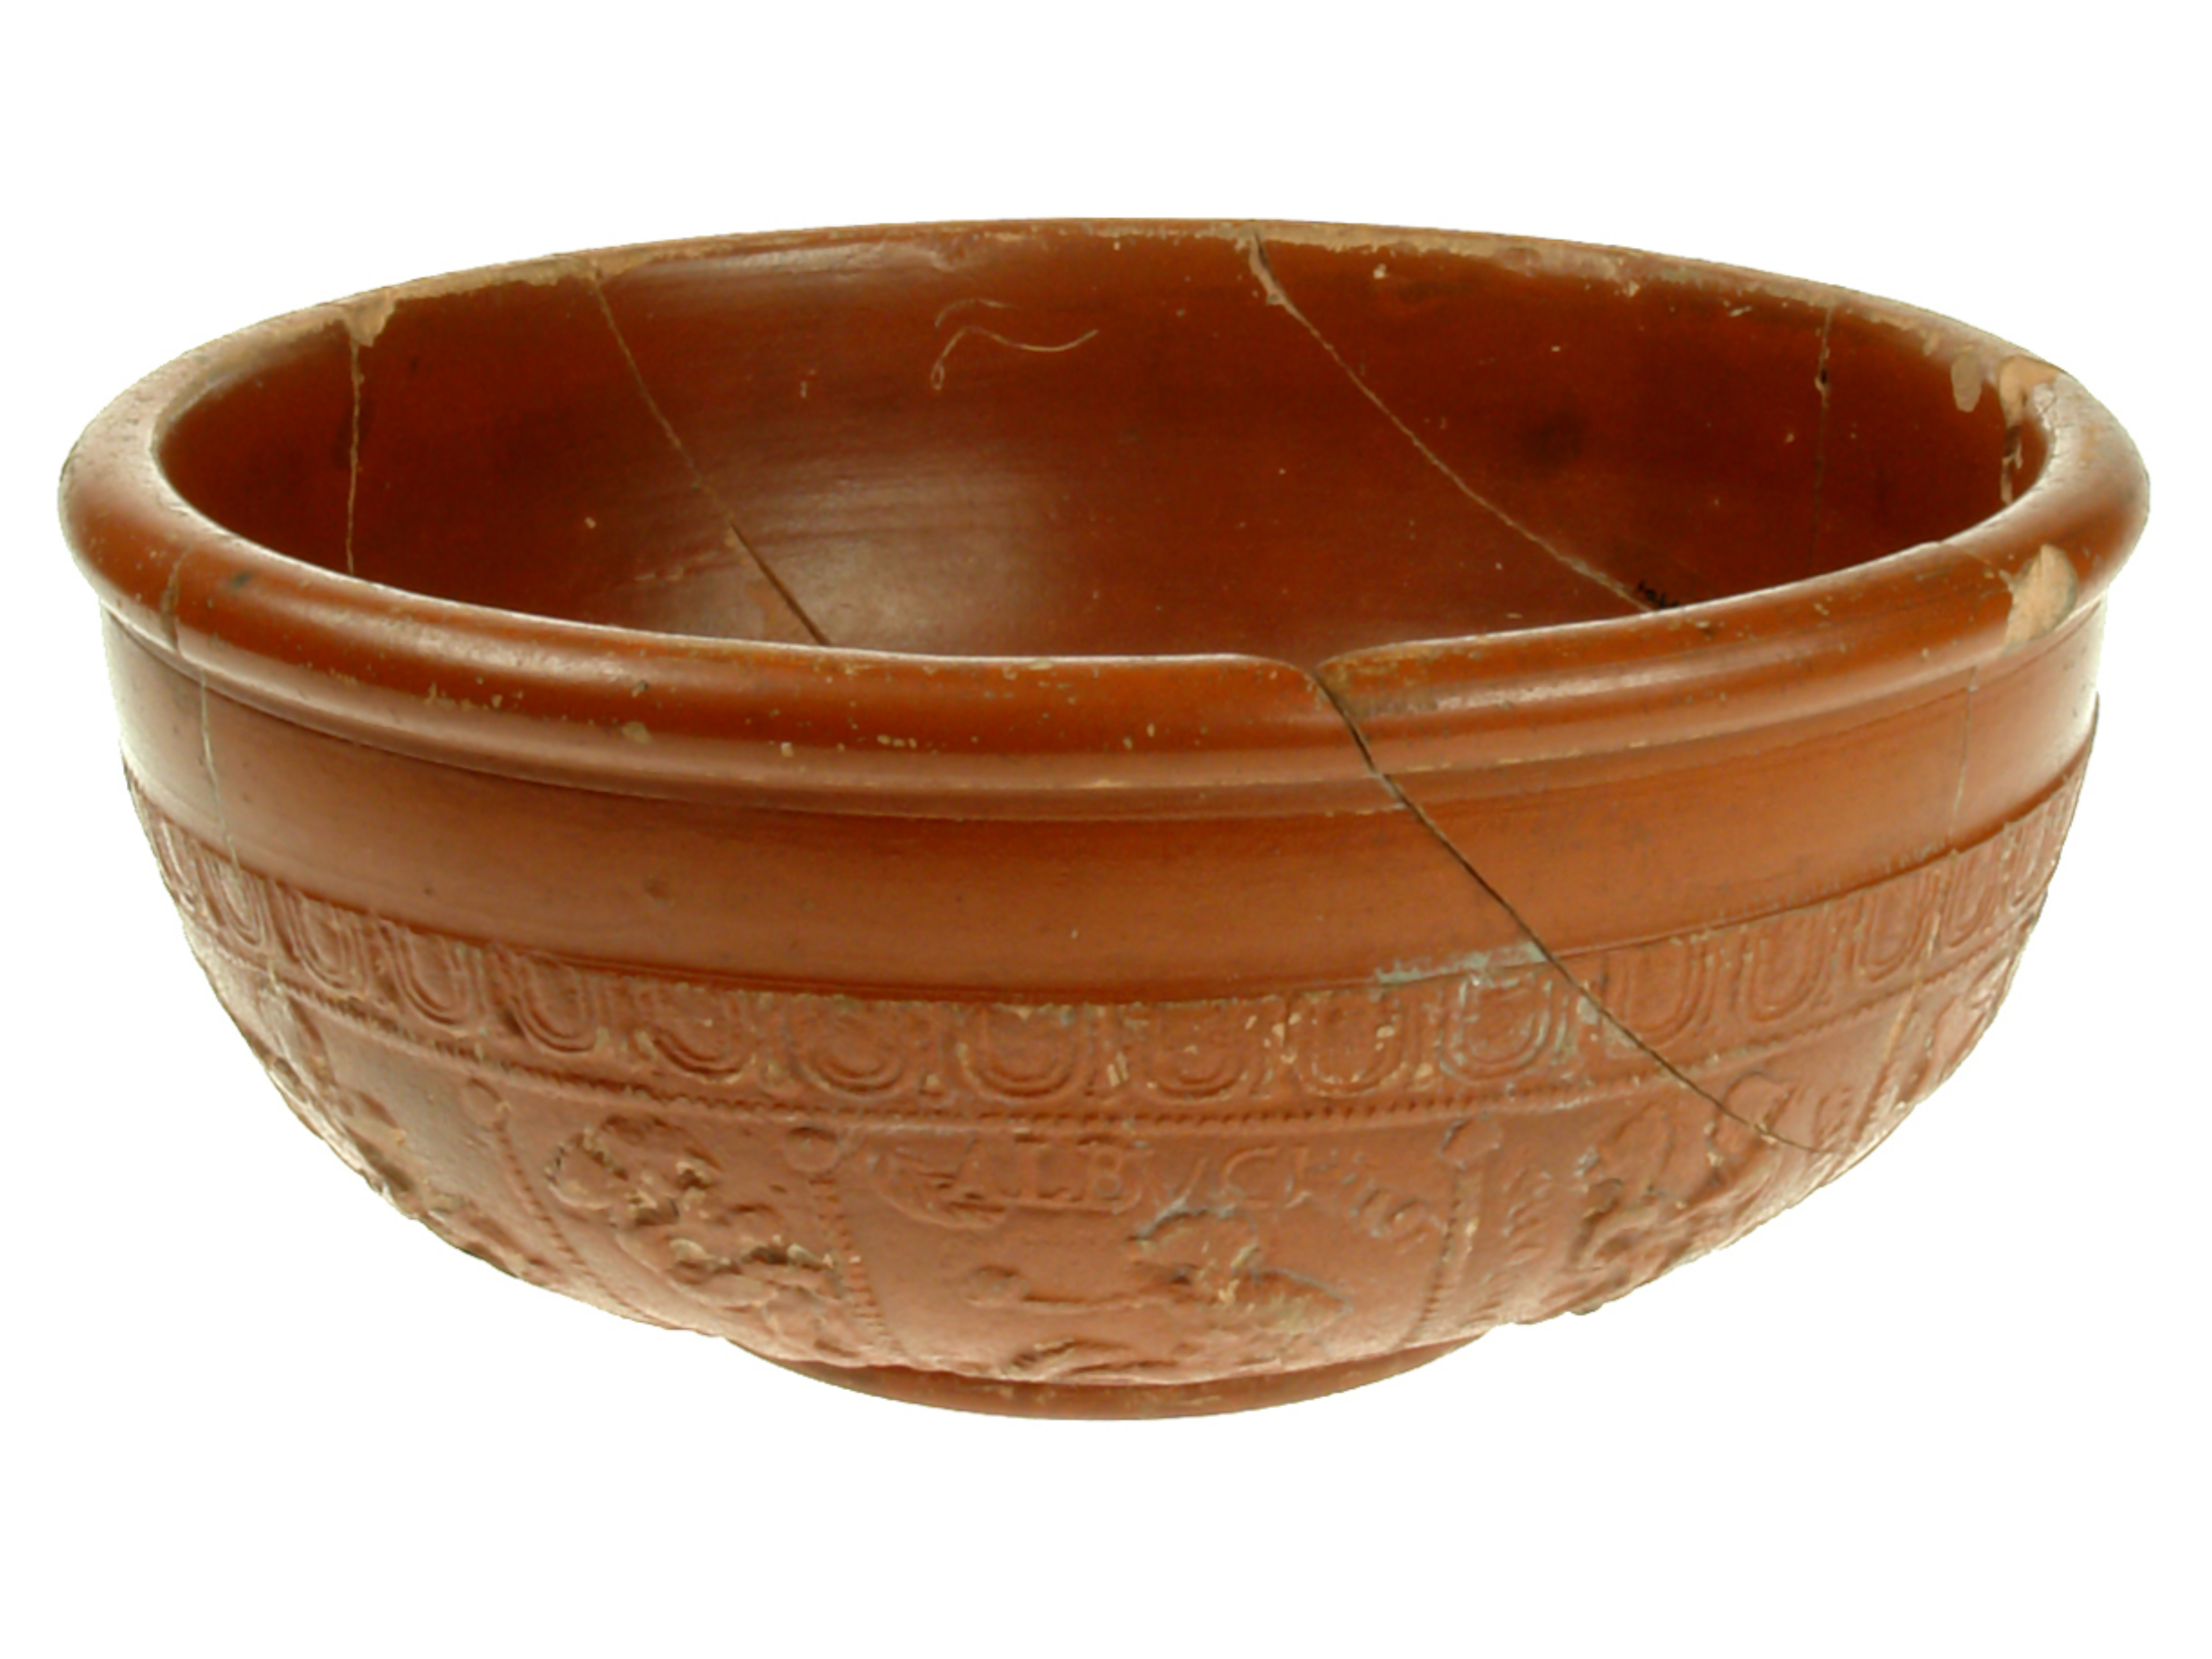 Repaired red Roman samian ware bowl with engravings